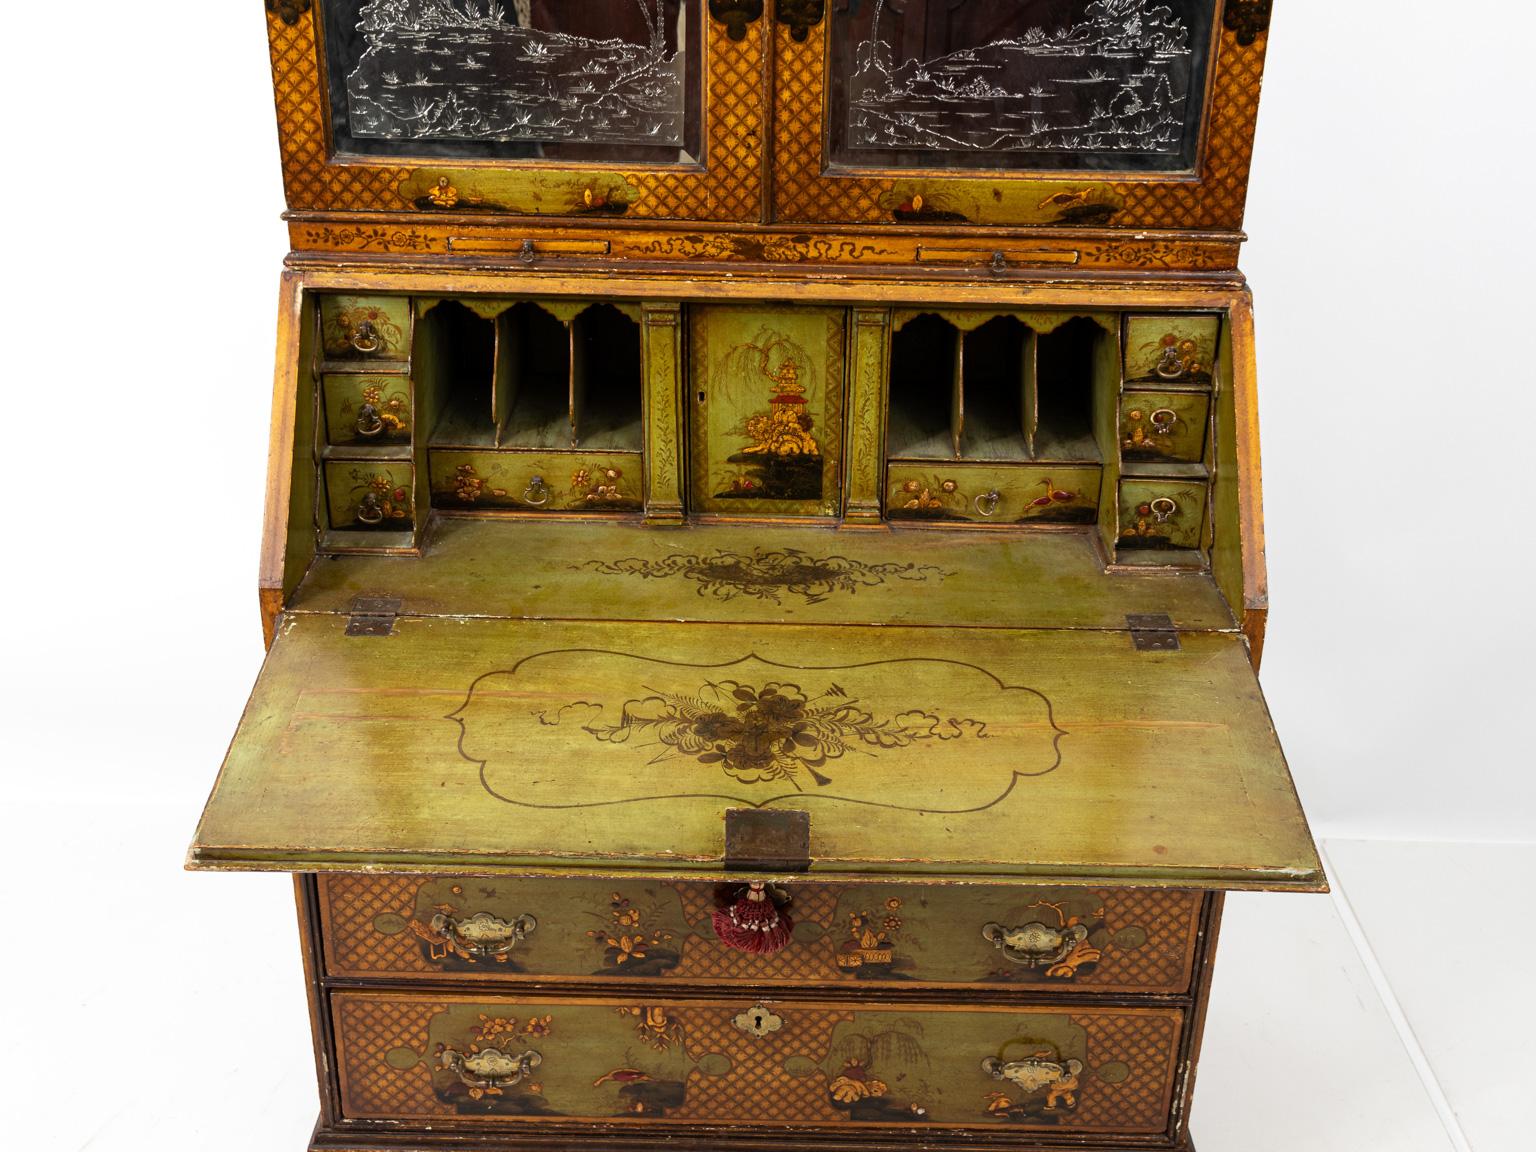 Chinoiserie style slant front desk with two parts and fitted interior, circa 18th century. The piece also features mirrored front with landscape scenes. Please note of wear consistent with antique age.